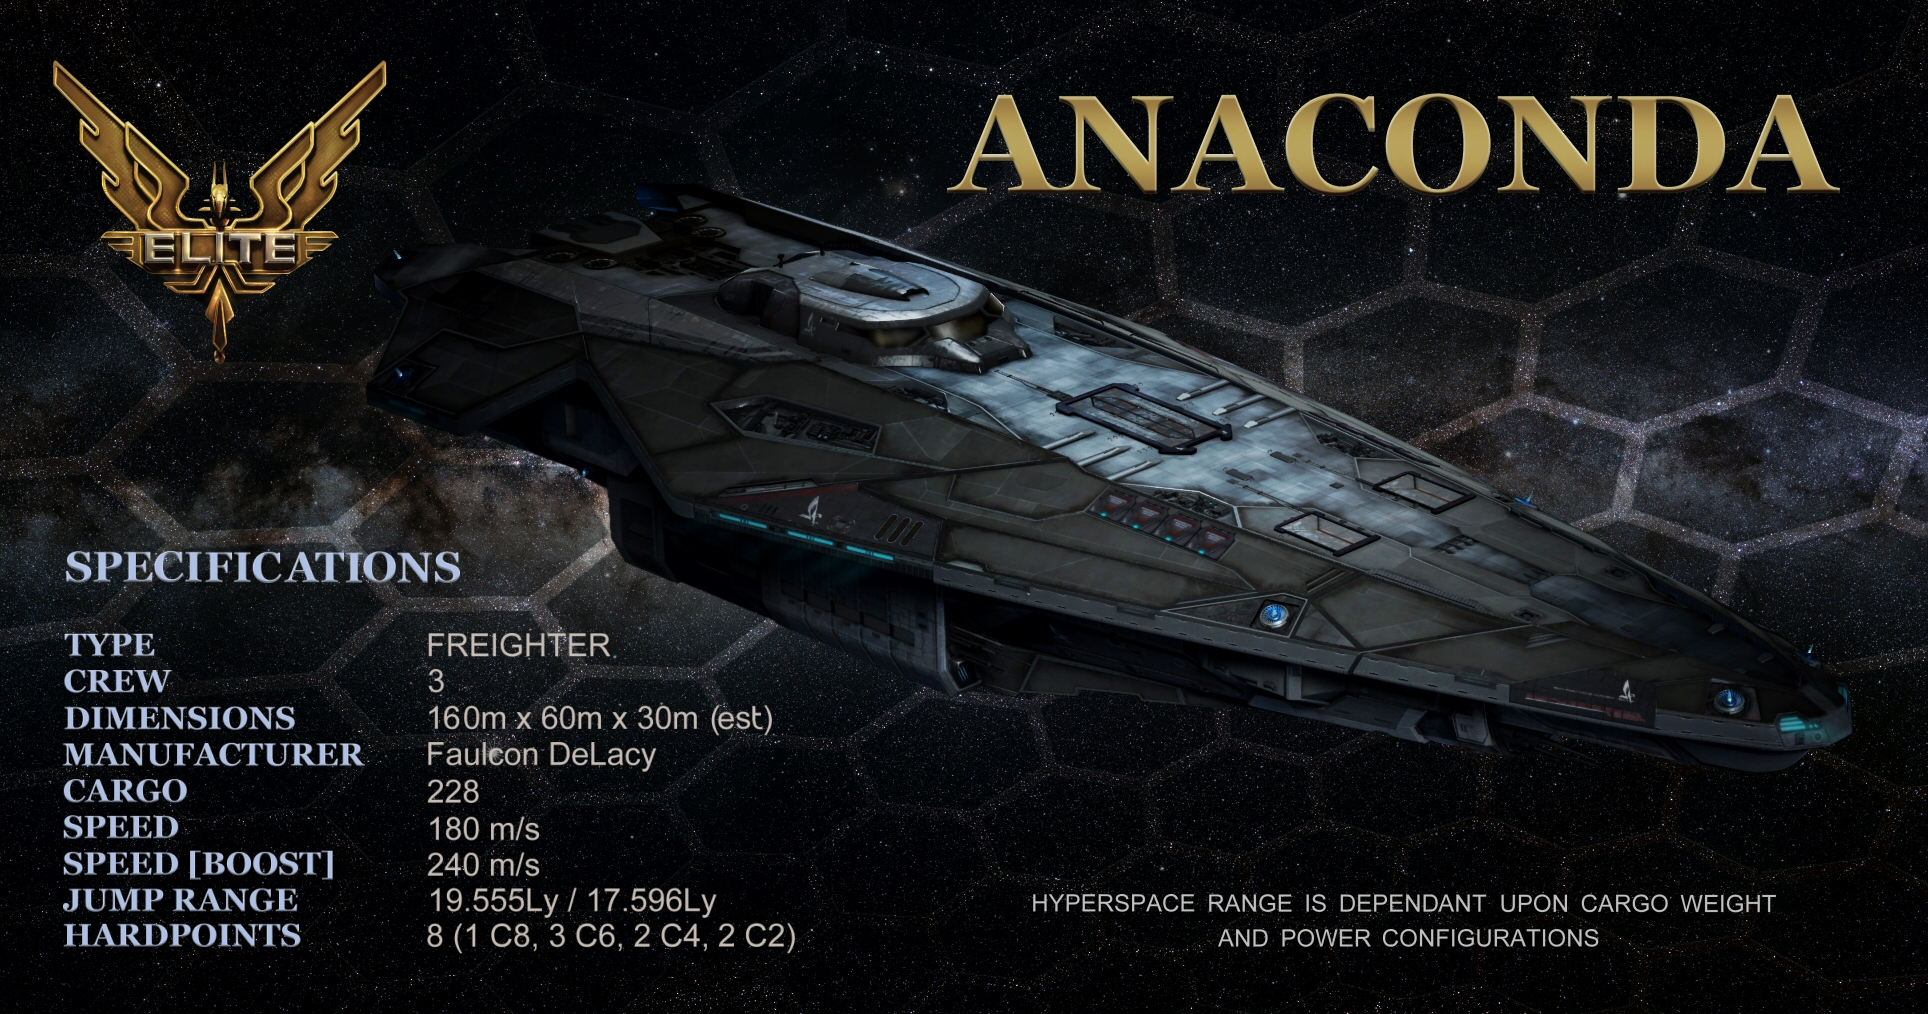 Ship Specification Wallpaper Out There So Forgive Any Replication